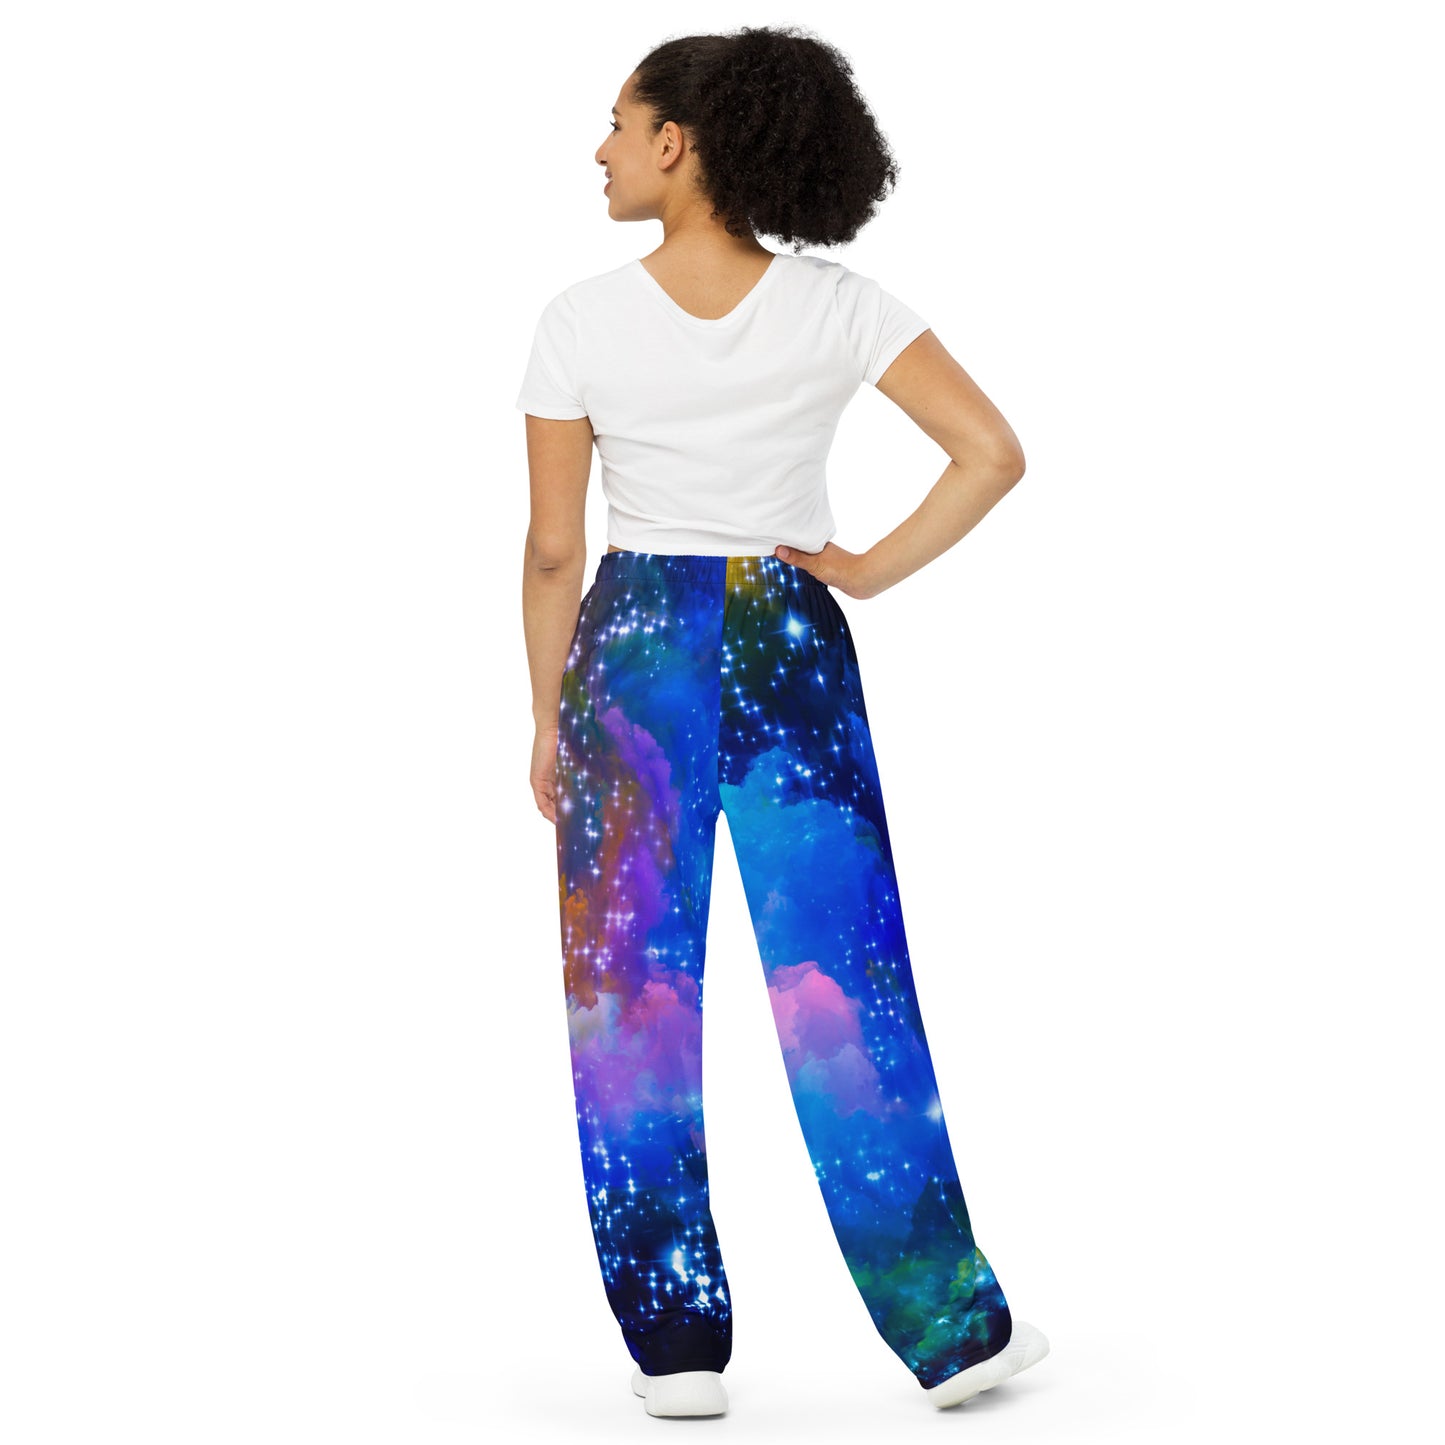 All-over space print unisex wide-leg pants